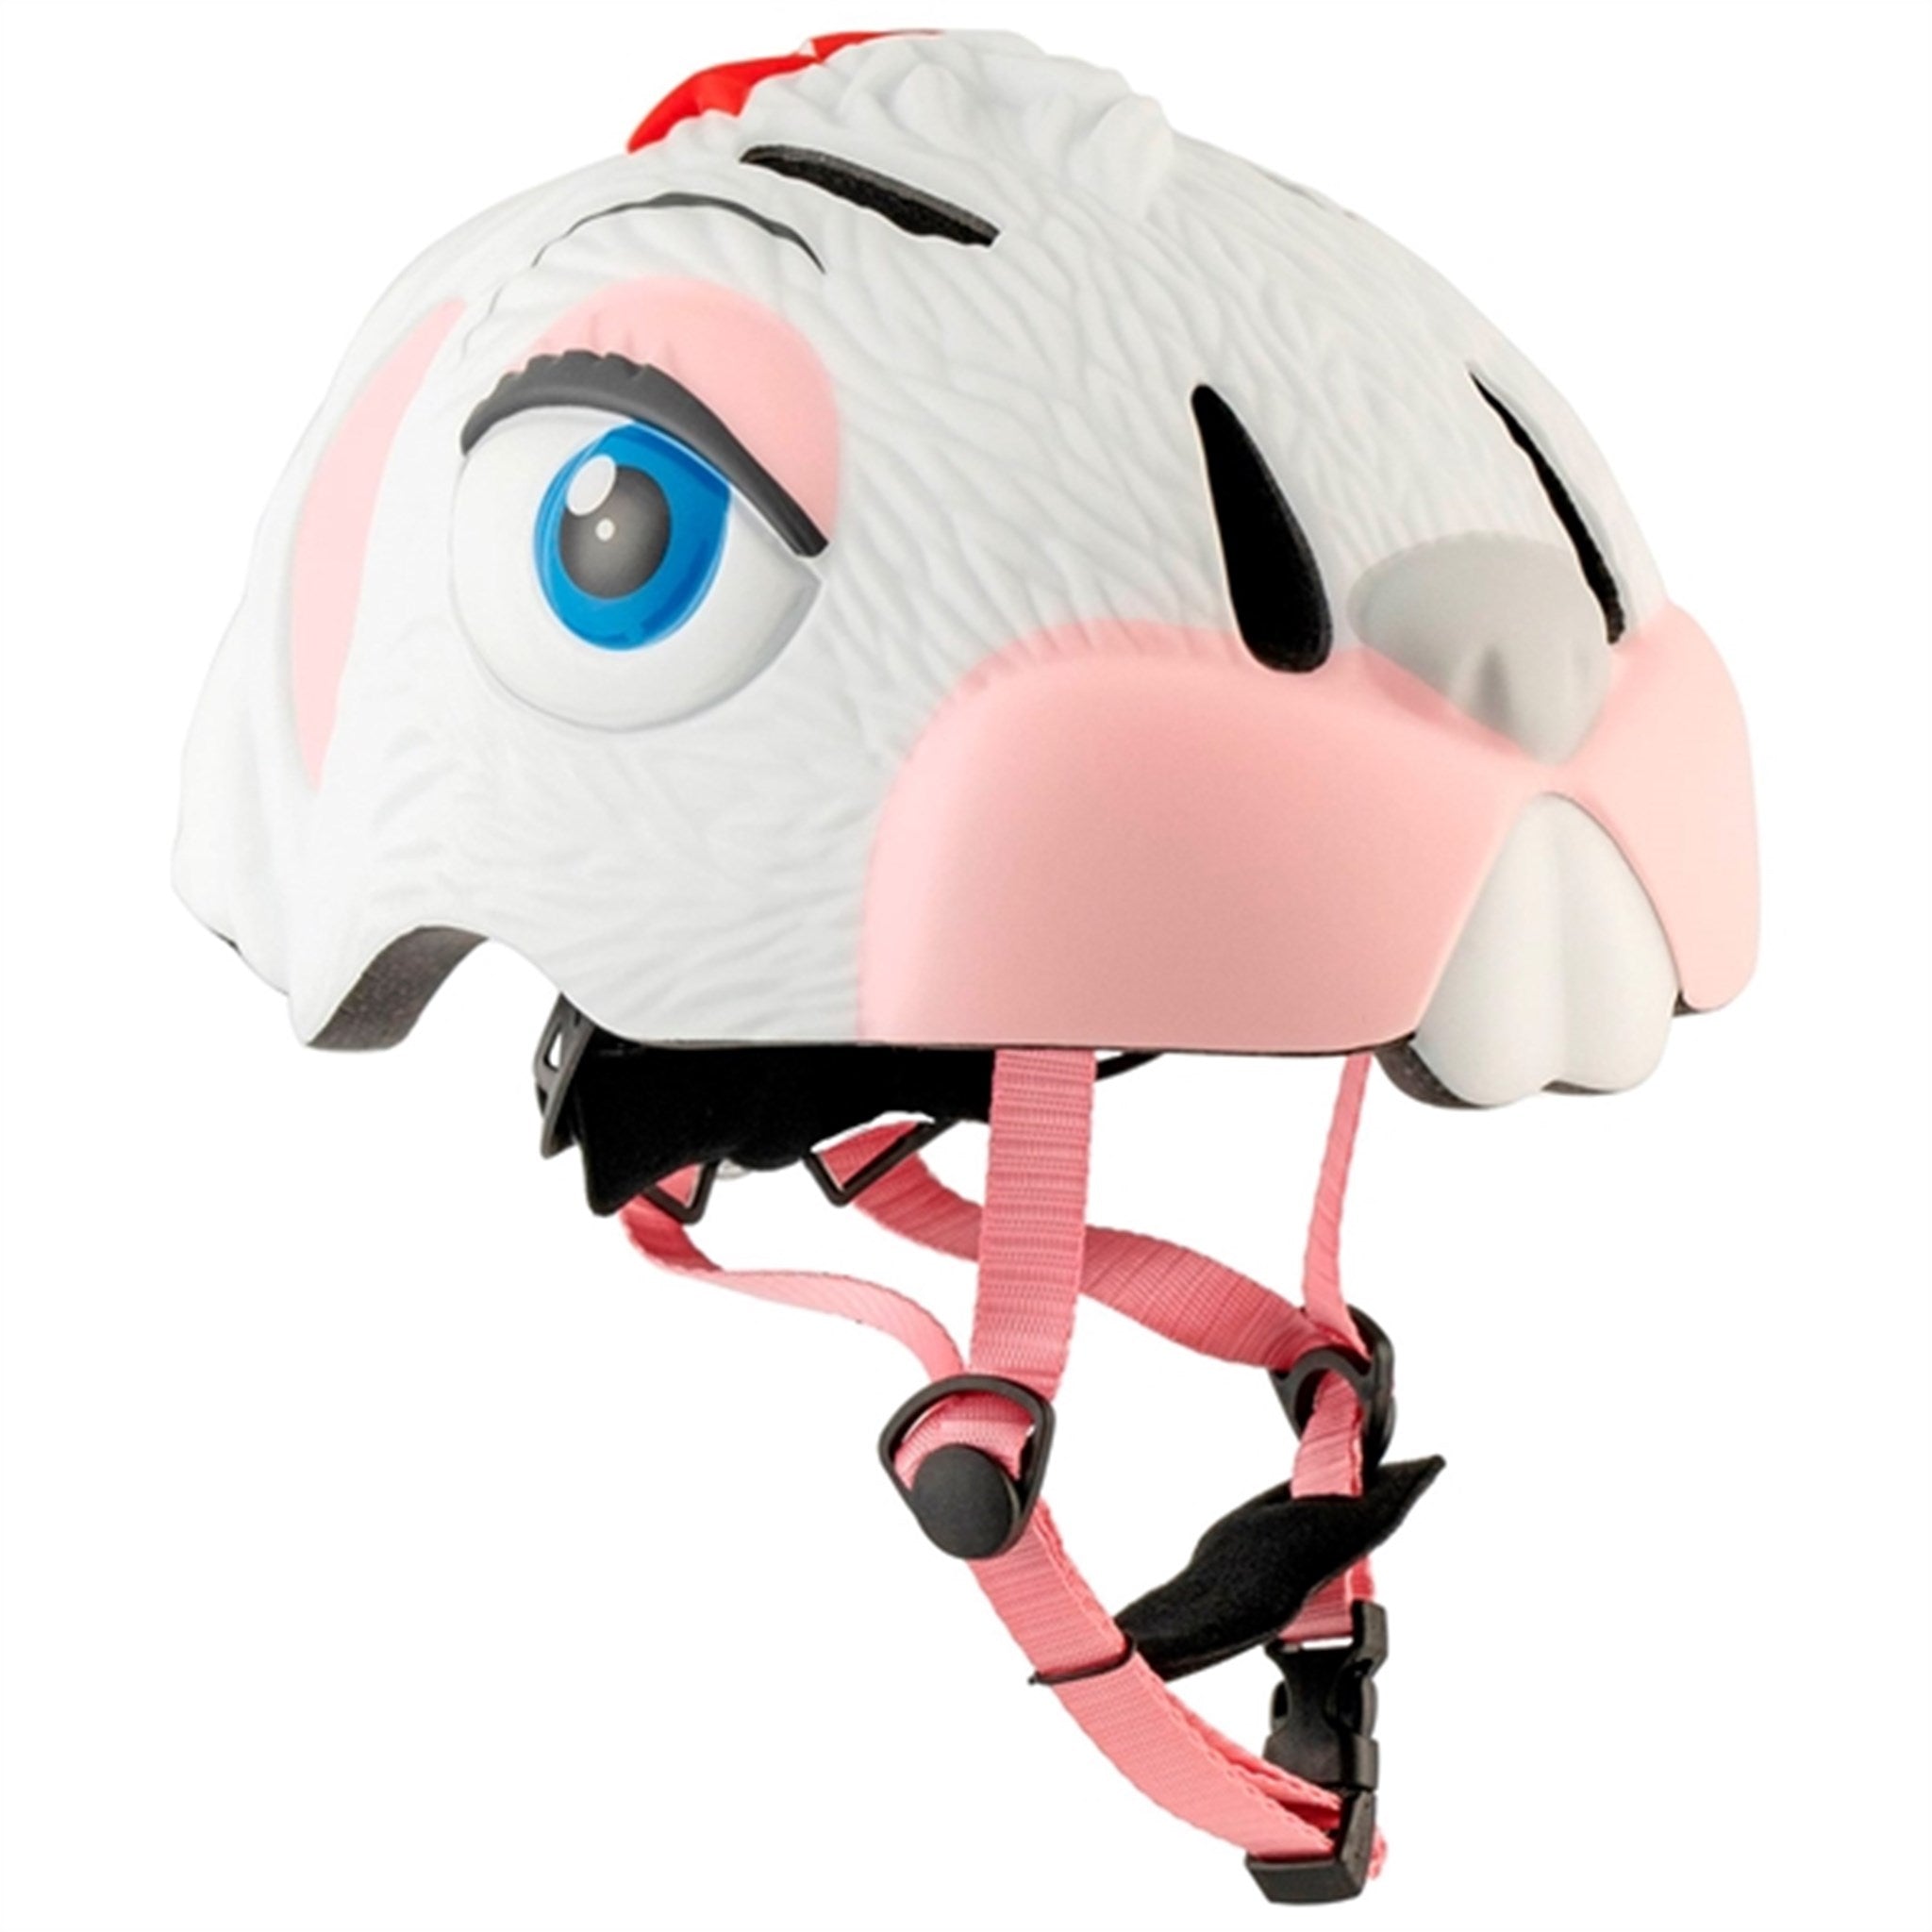 Crazy Safety Bunny Bicycle Helmet White